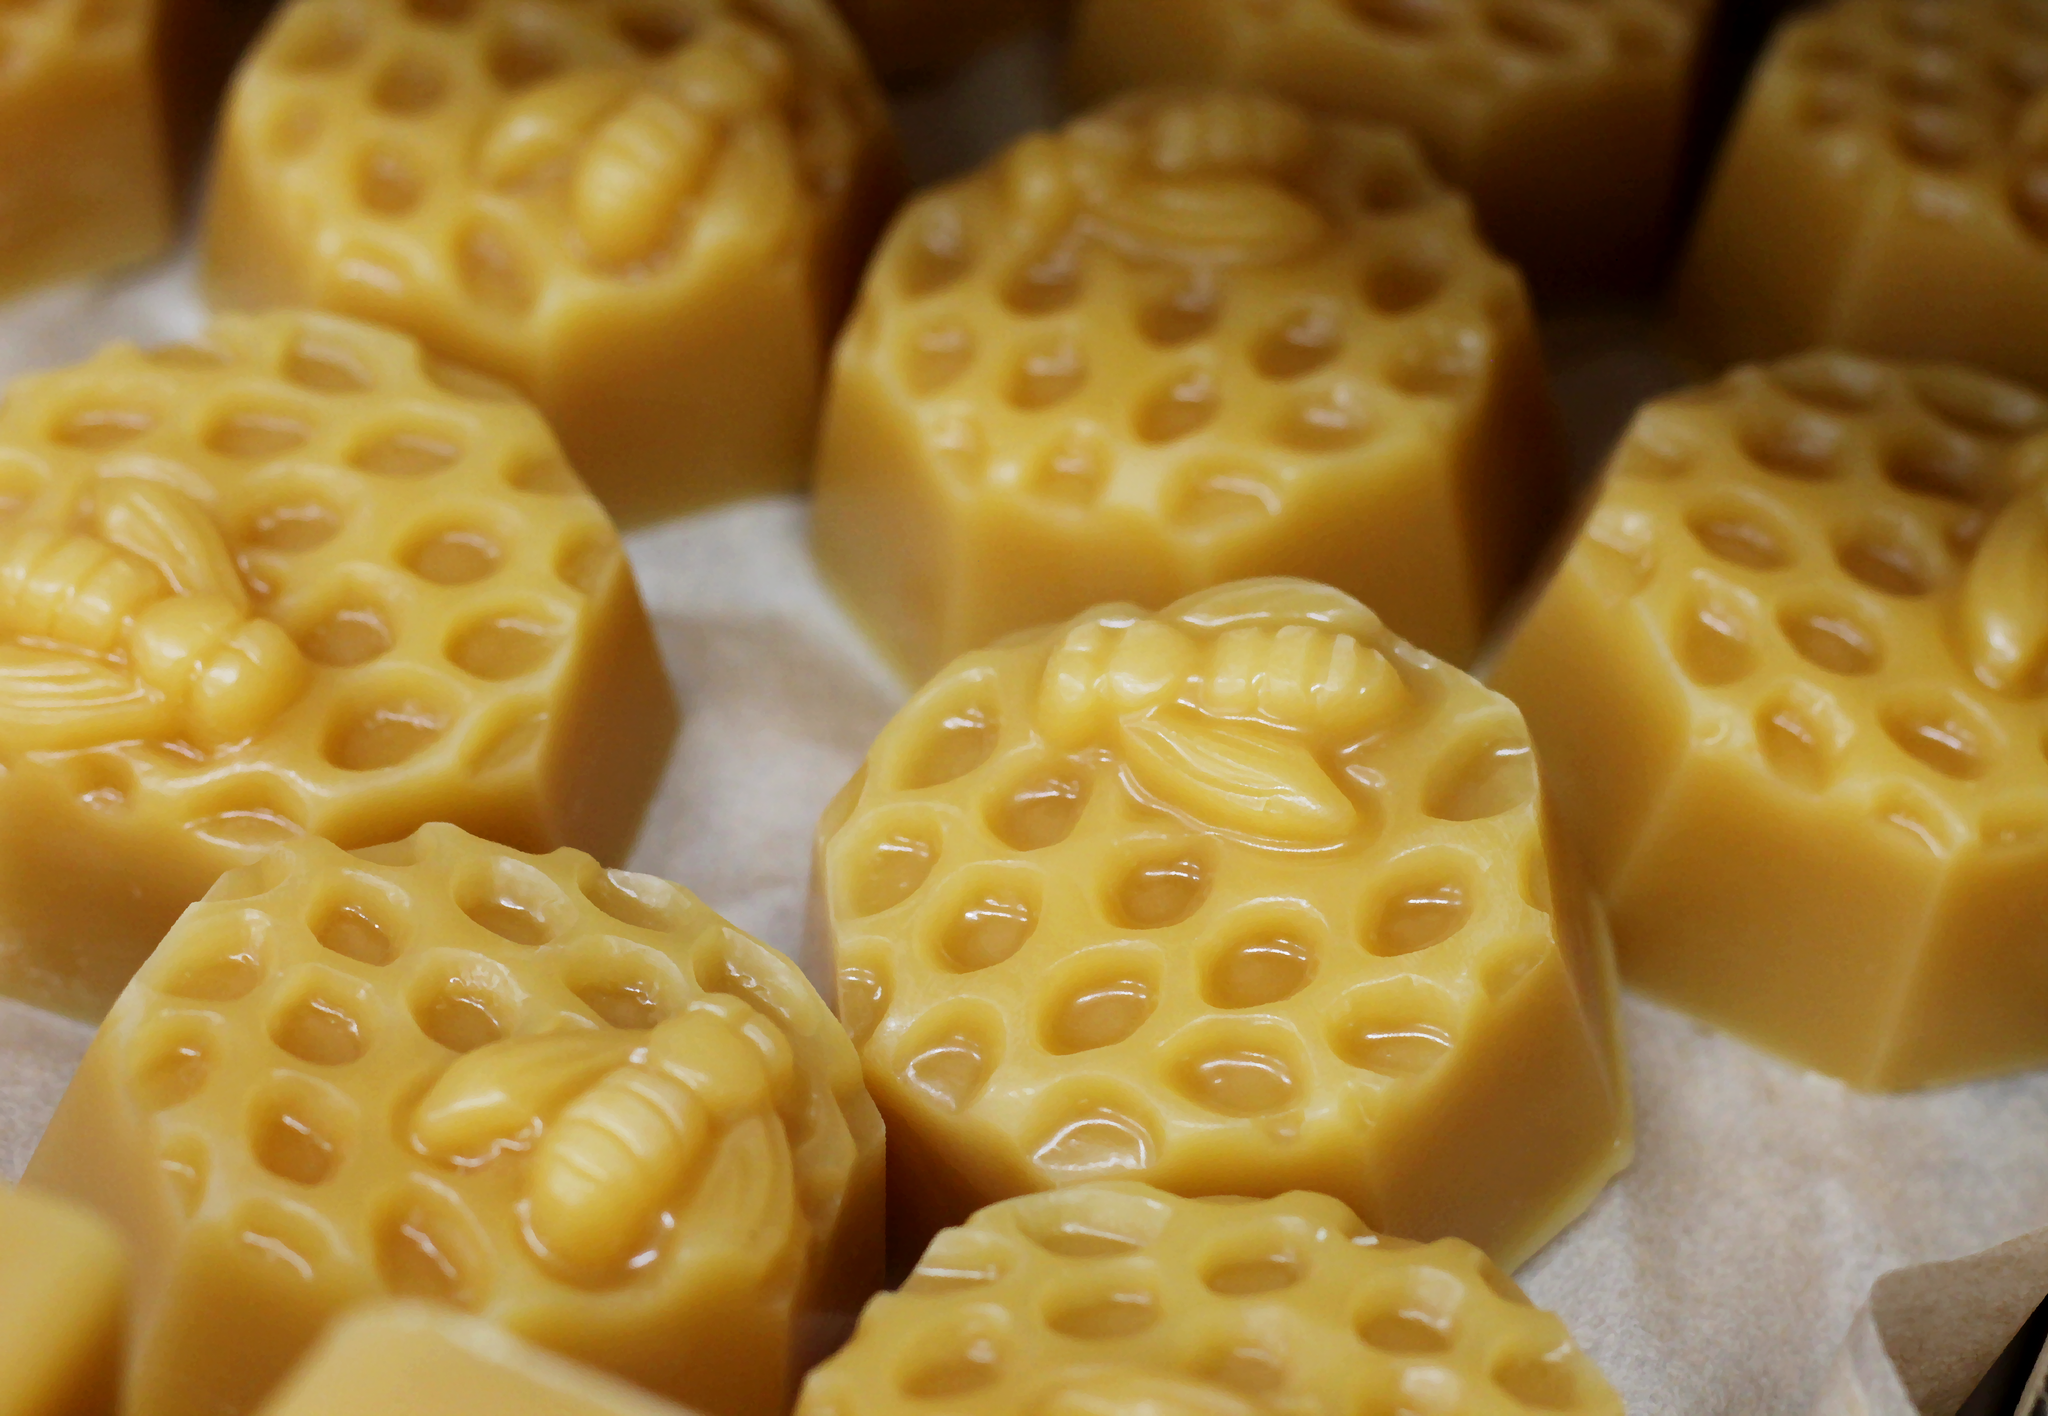 How to use Beeswax Blocks in your DIY Recipes